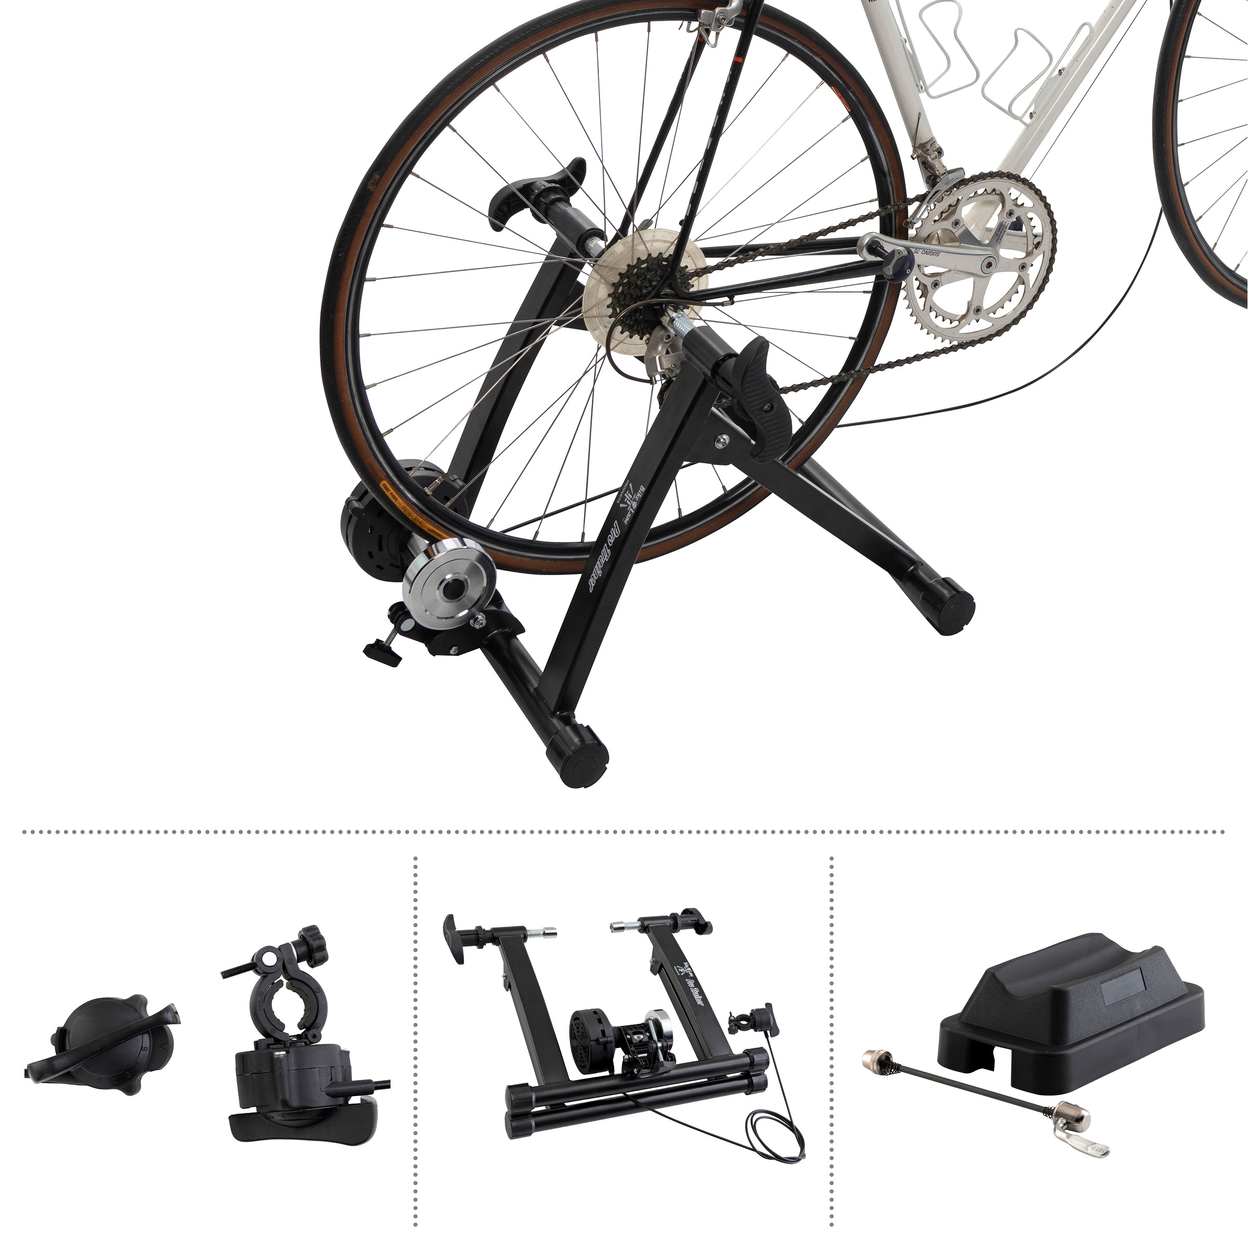 Bike Lane Pro Trainer Bicycle Indoor Trainer Exercise Cycling Stand